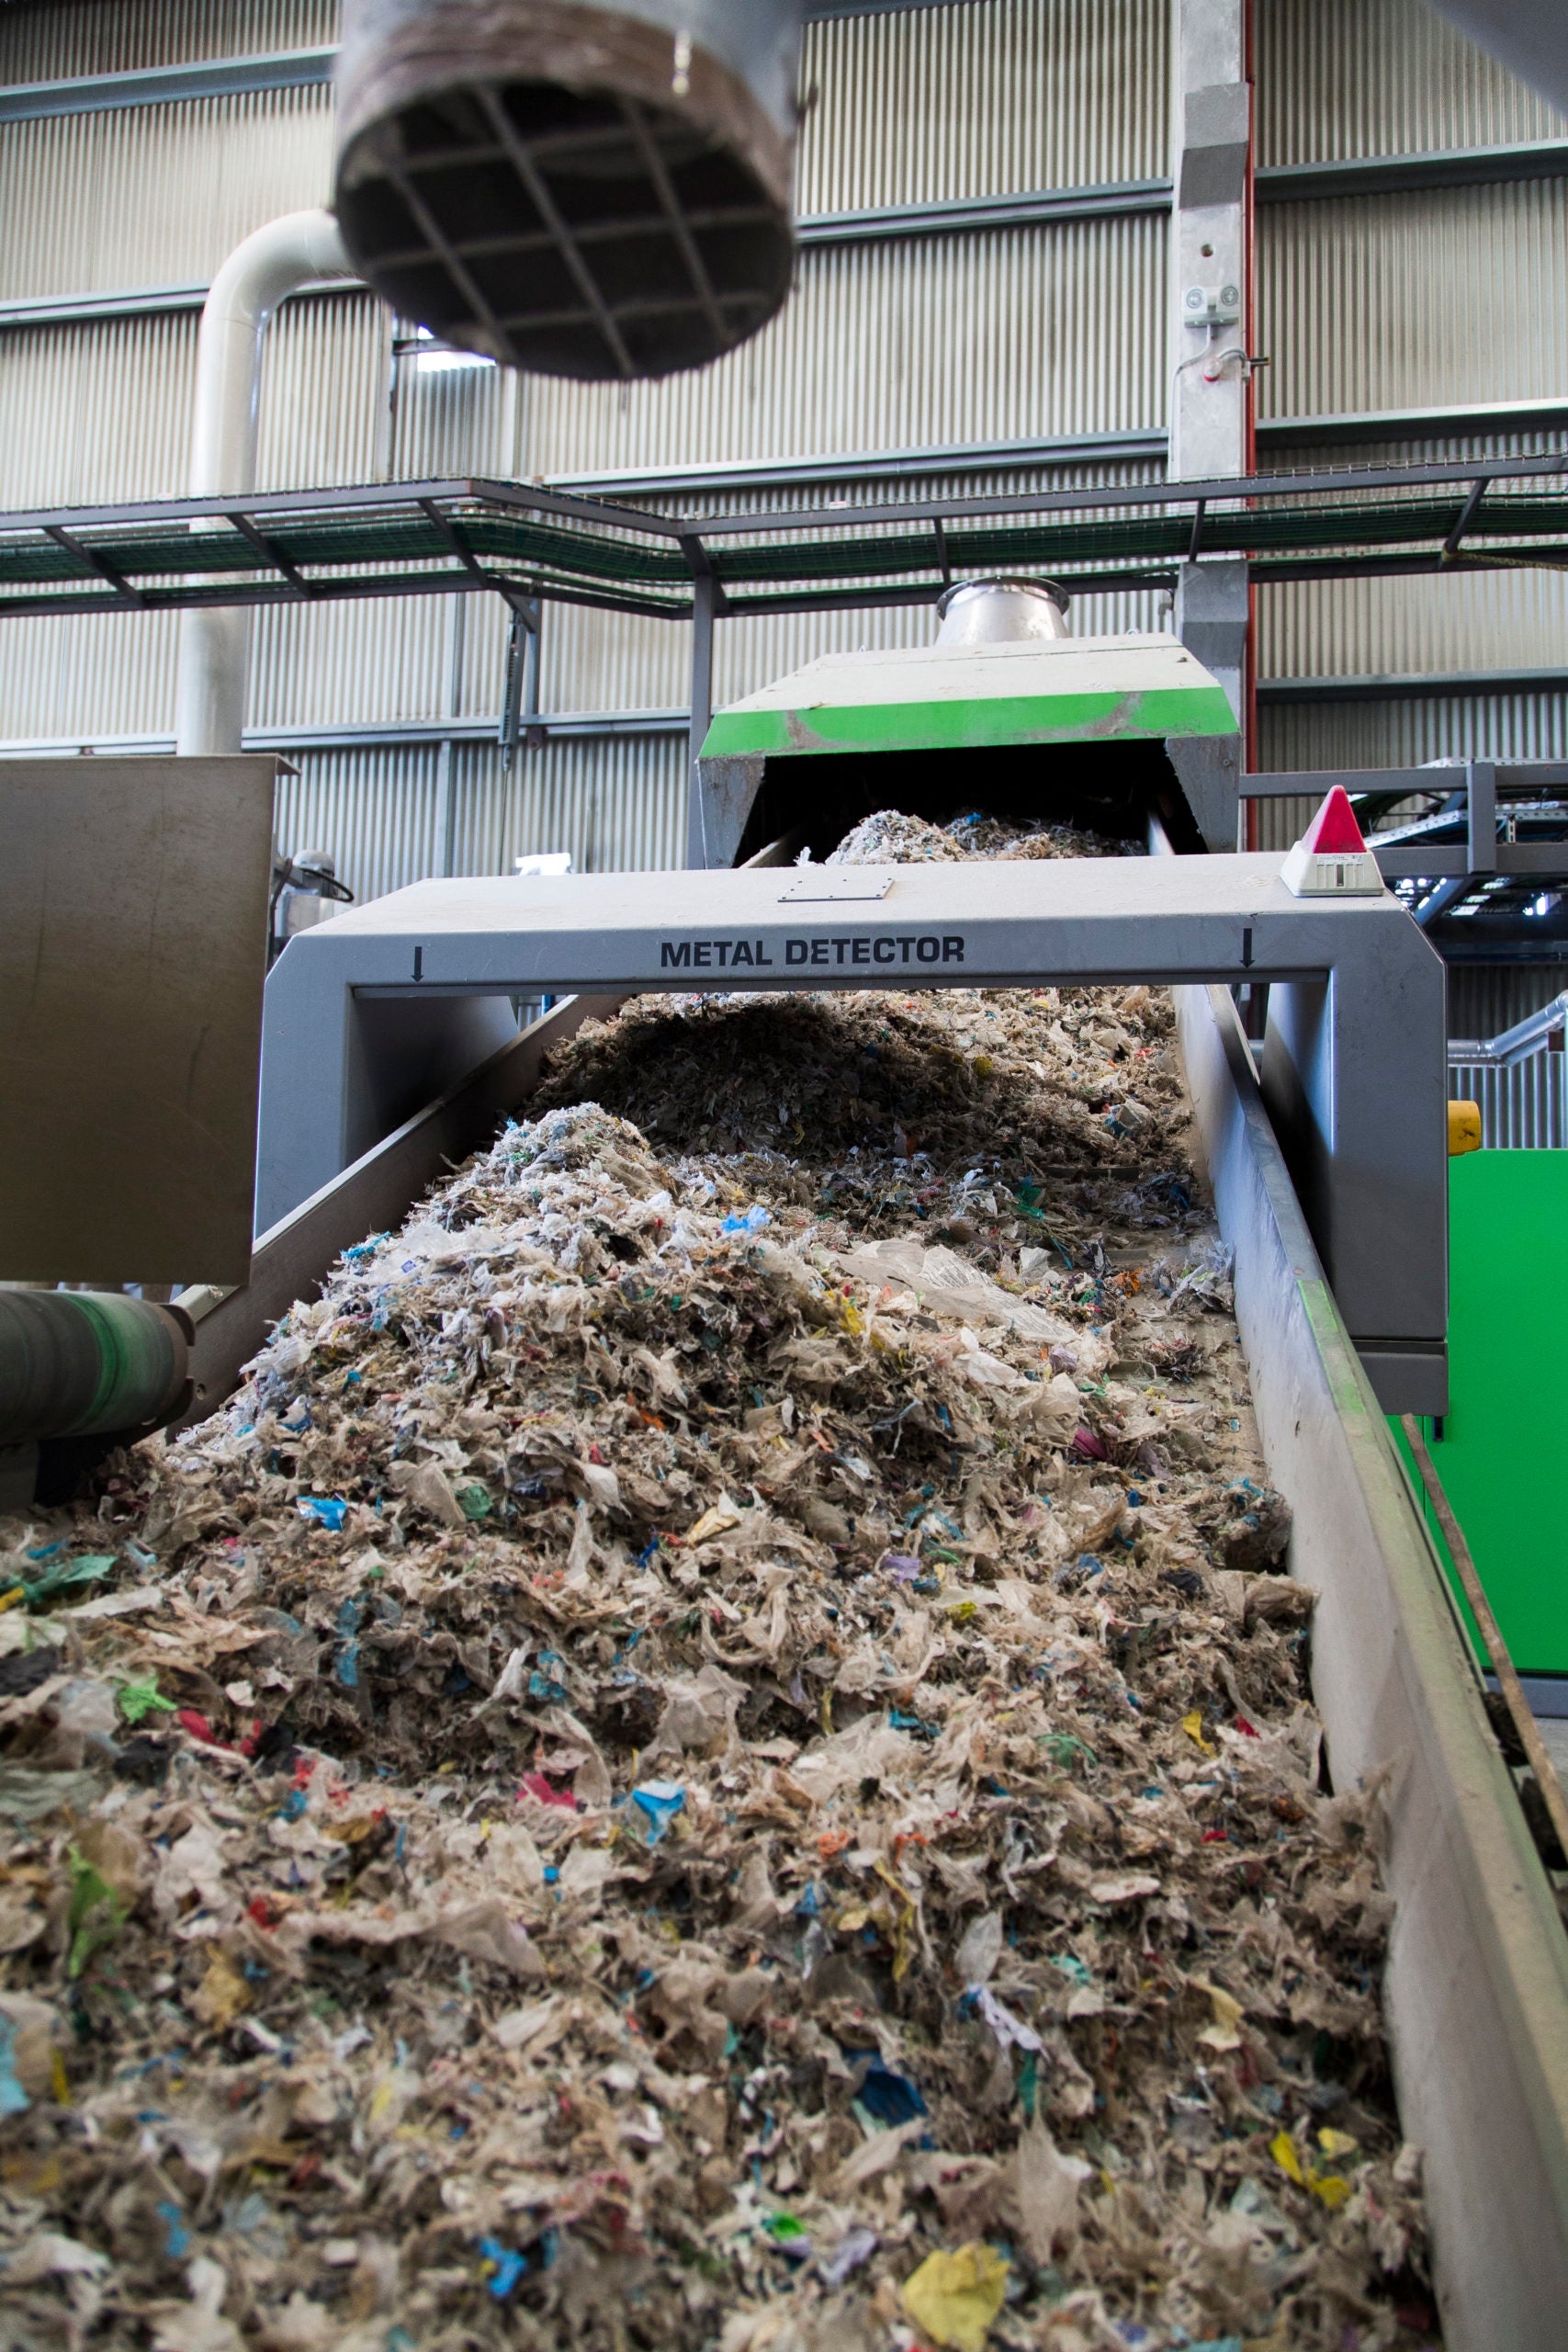 INEOS and Plastic Energy partner for plastic recycling trial in Scotland